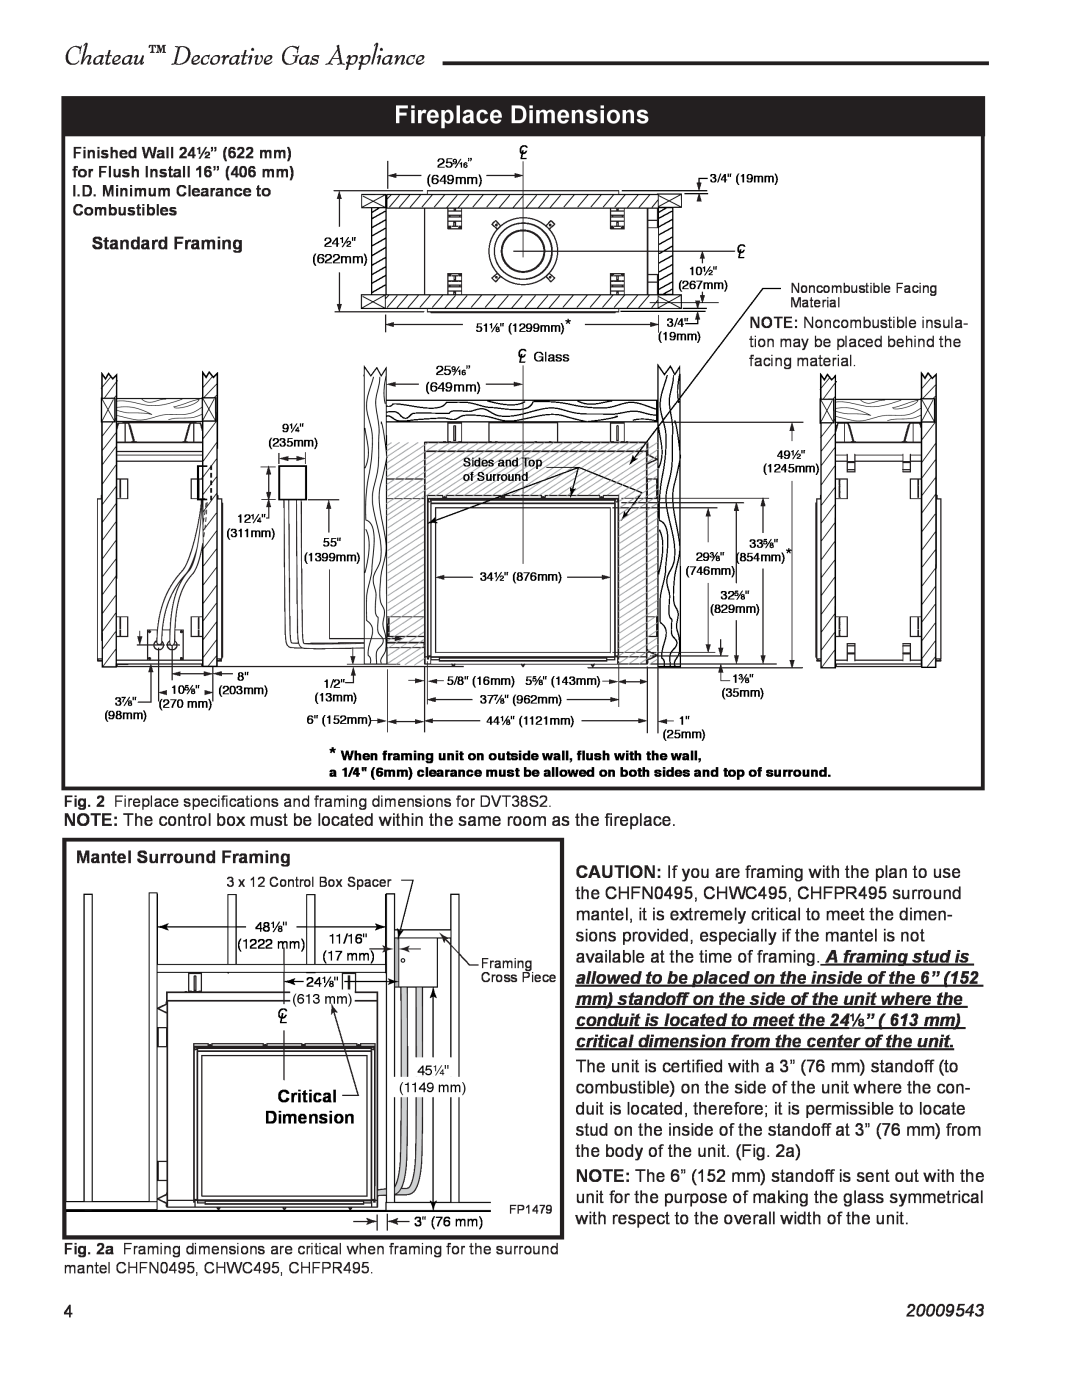 Vermont Casting DVT38S2 Fireplace Dimensions, Standard Framing, Mantel Surround Framing, Critical, 20009543 